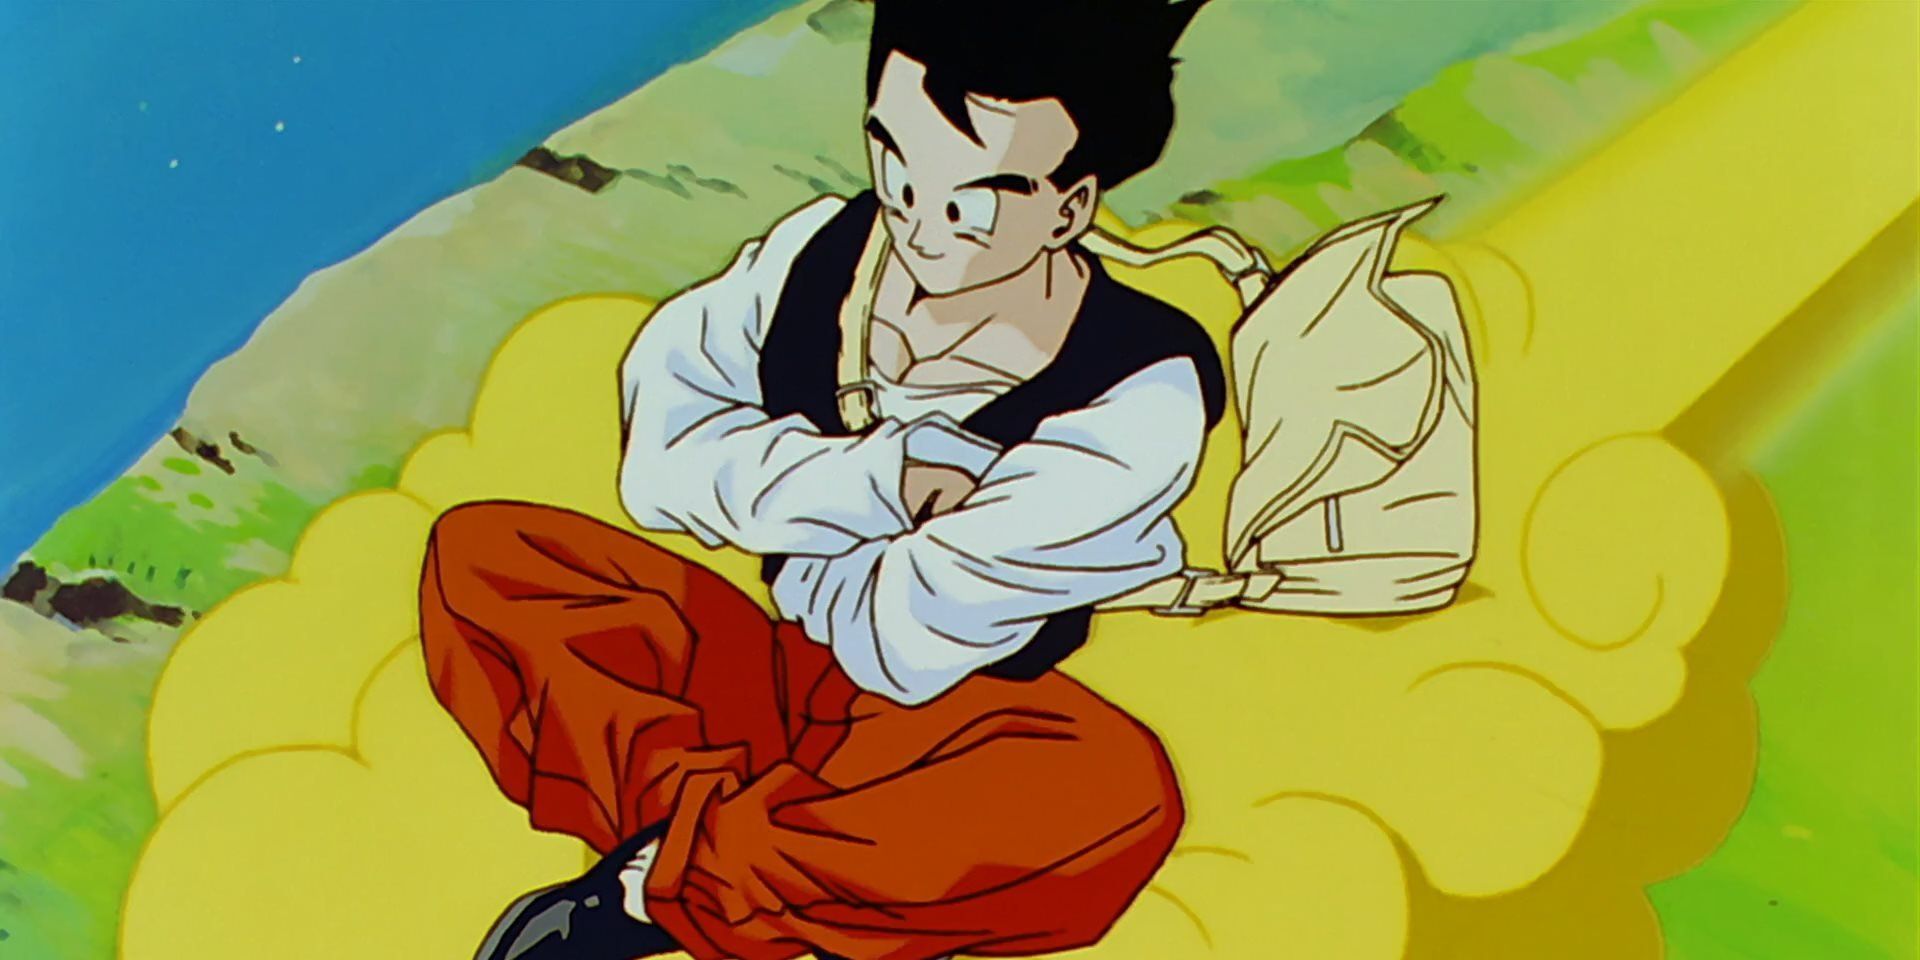 Adult Gohan rides the Flying Nimbus to school in Dragon Ball Z